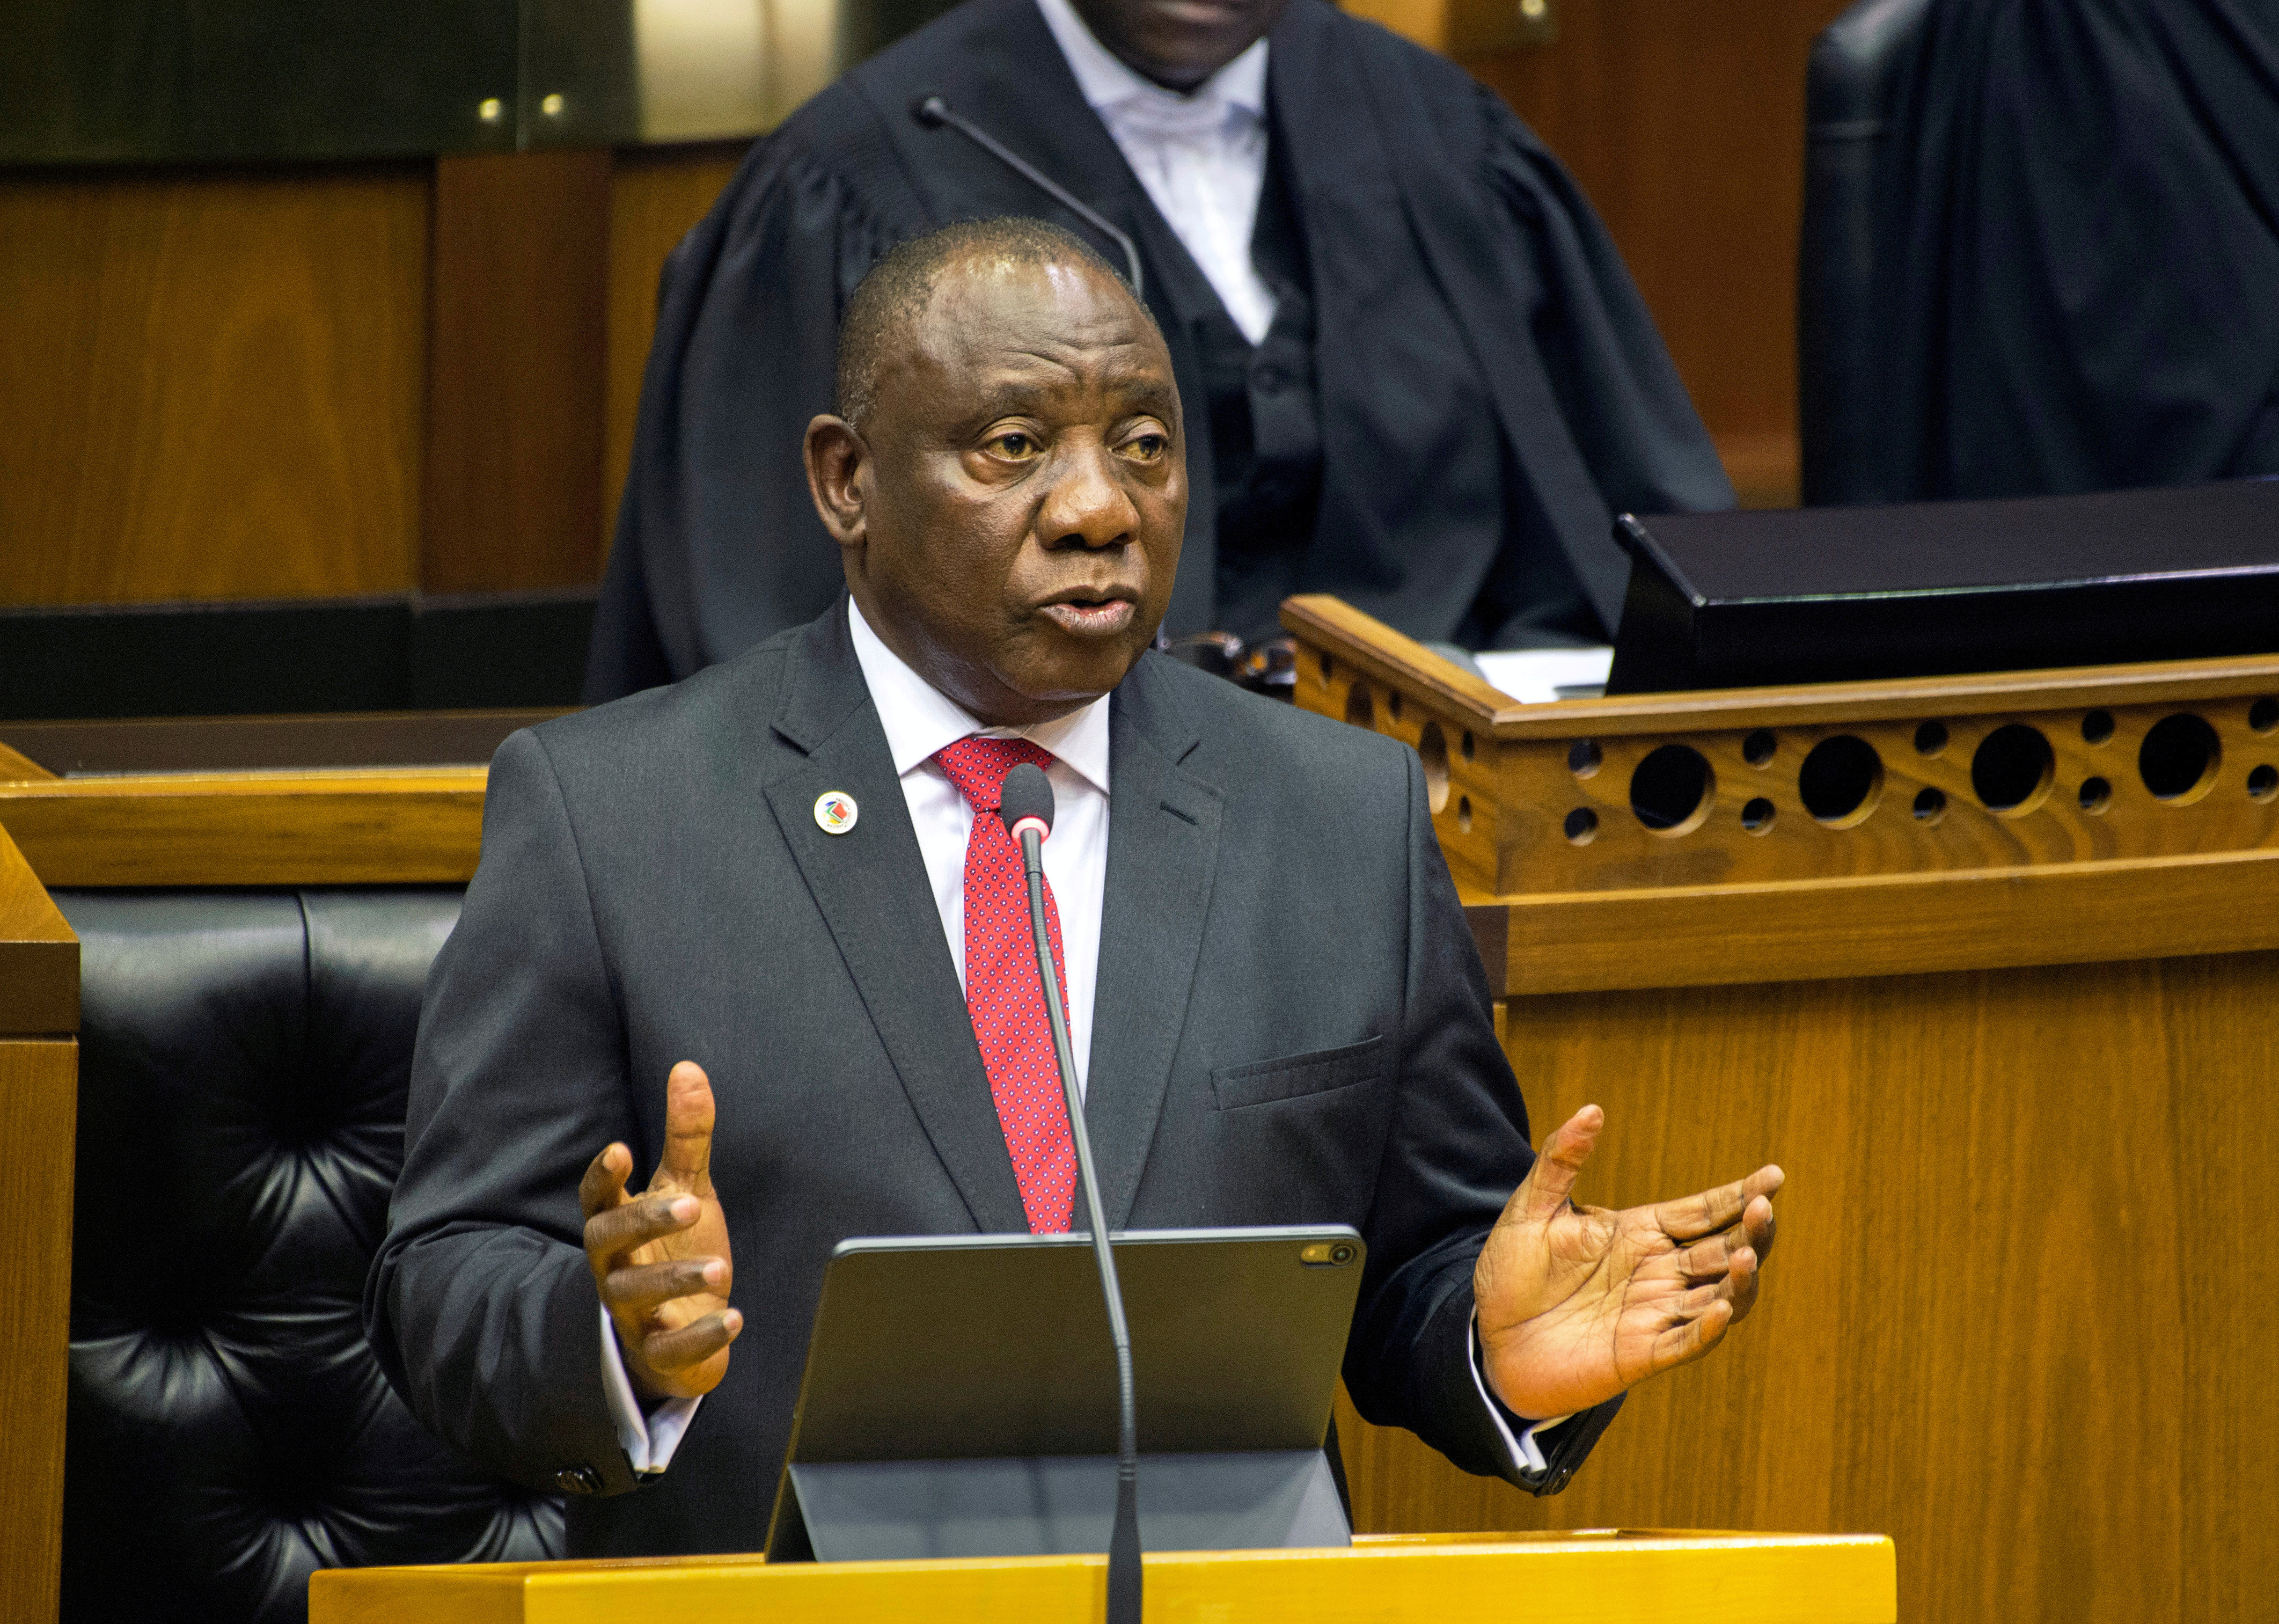 South African President Cyril Ramaphosa delivers his State of the Nation Address at parliament in Cape Town